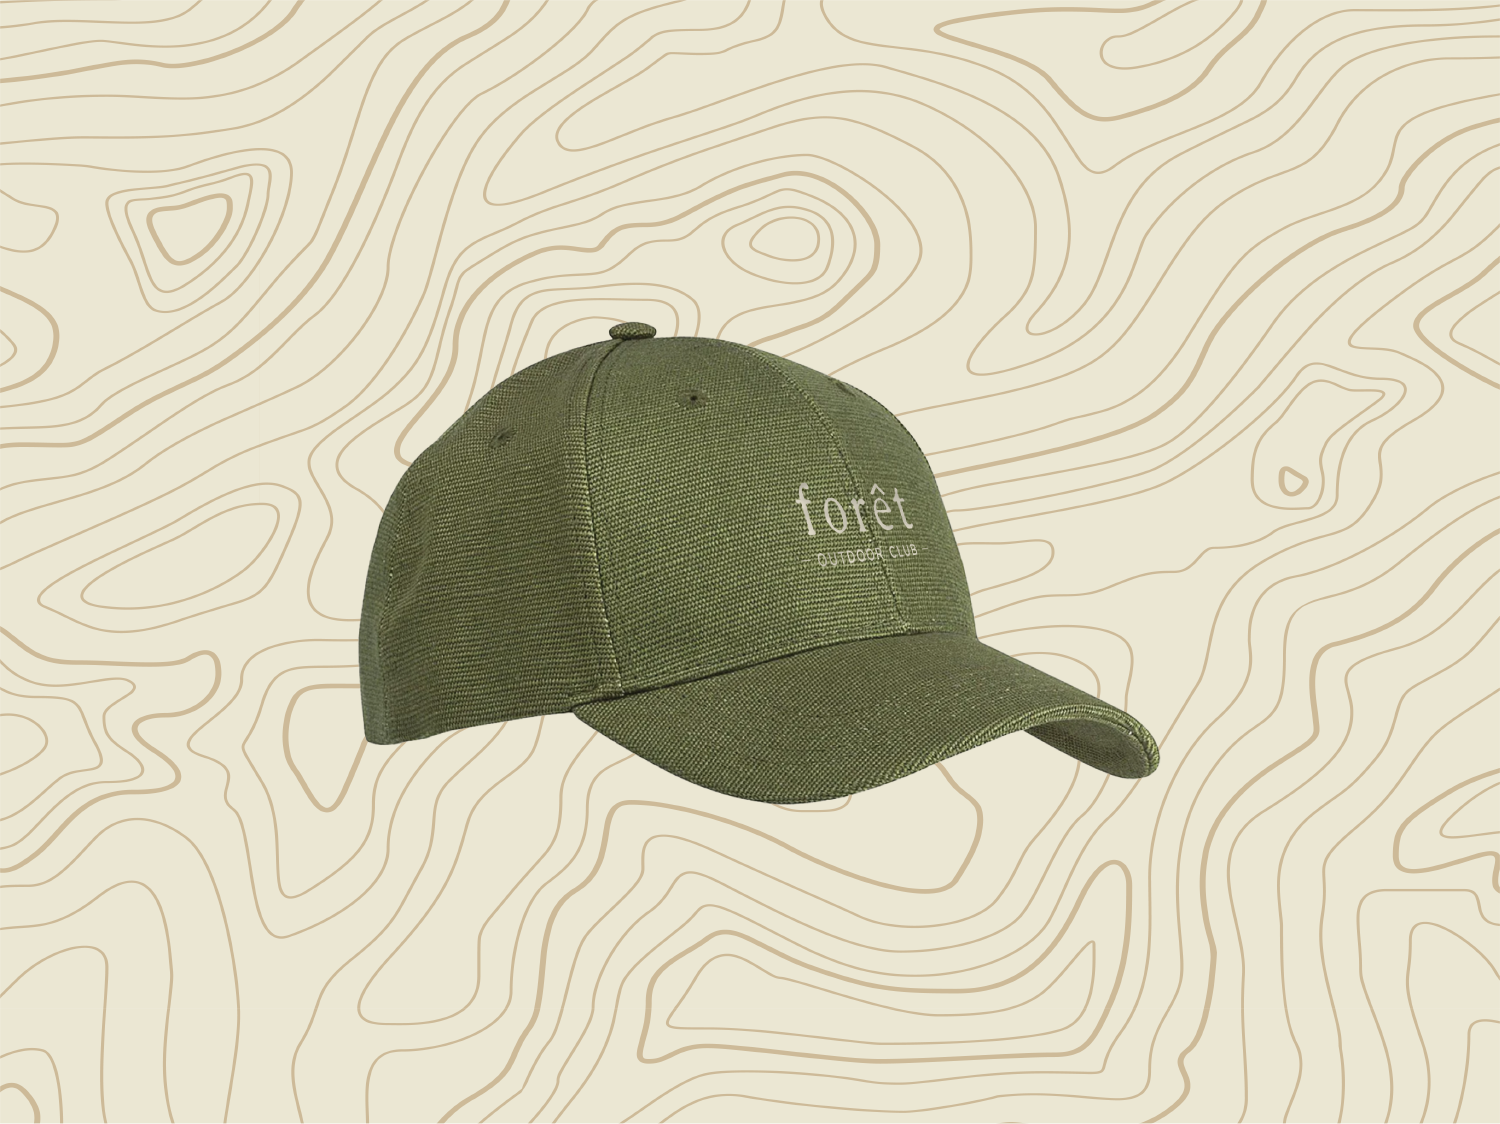 A mockup of a green baseball cap with the forêt logo on it.